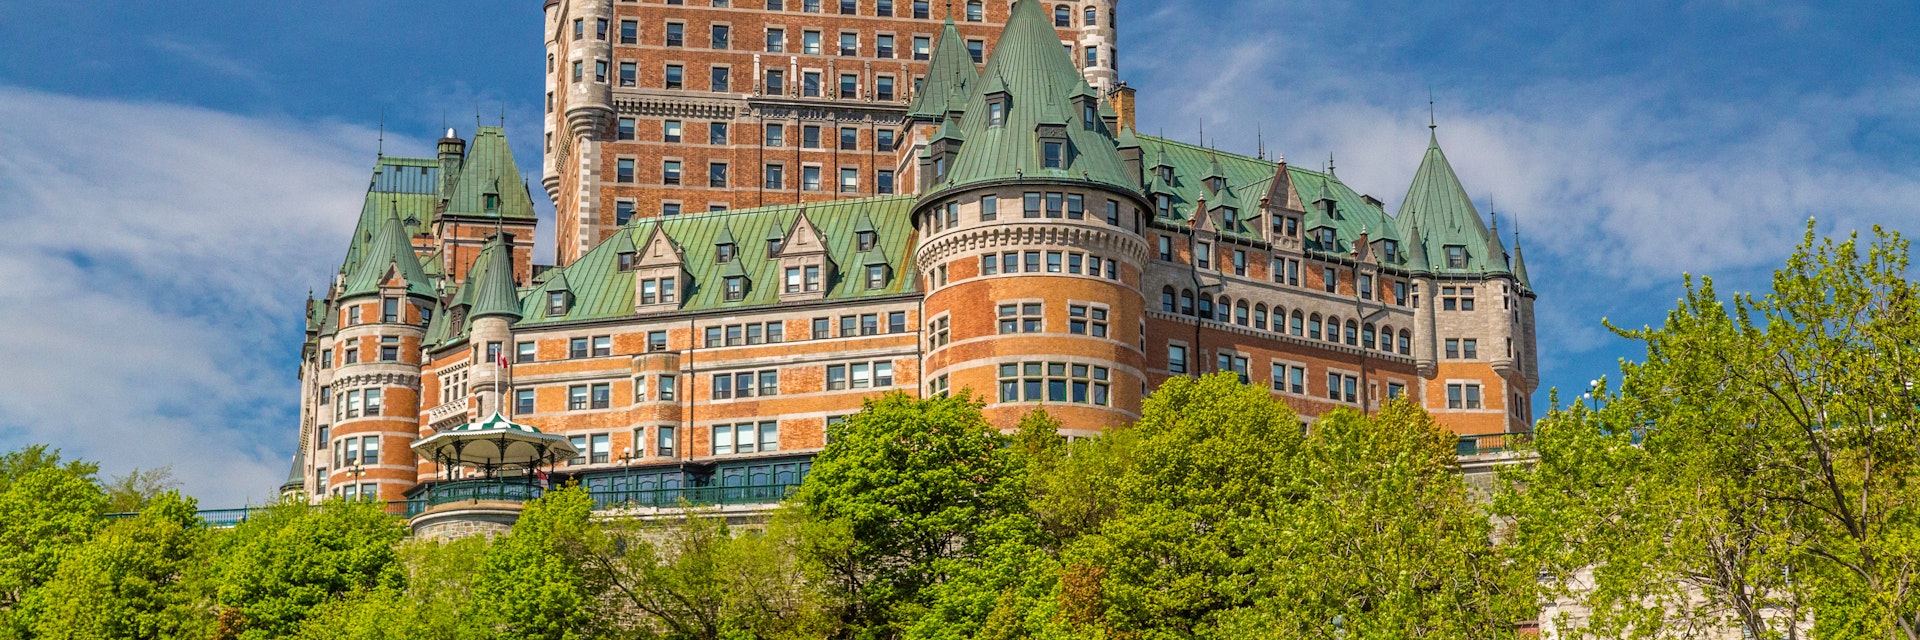 Low-angle view of Chateau Frontenac.
1458223256
architecture, attraction, building, canada, canadian, chateau, chateau frontenac, city, cityscape, famous, french, frontenac, historic, historical, history, hotel, landmark, patina, quebec canada, quebec city, tourism, travel